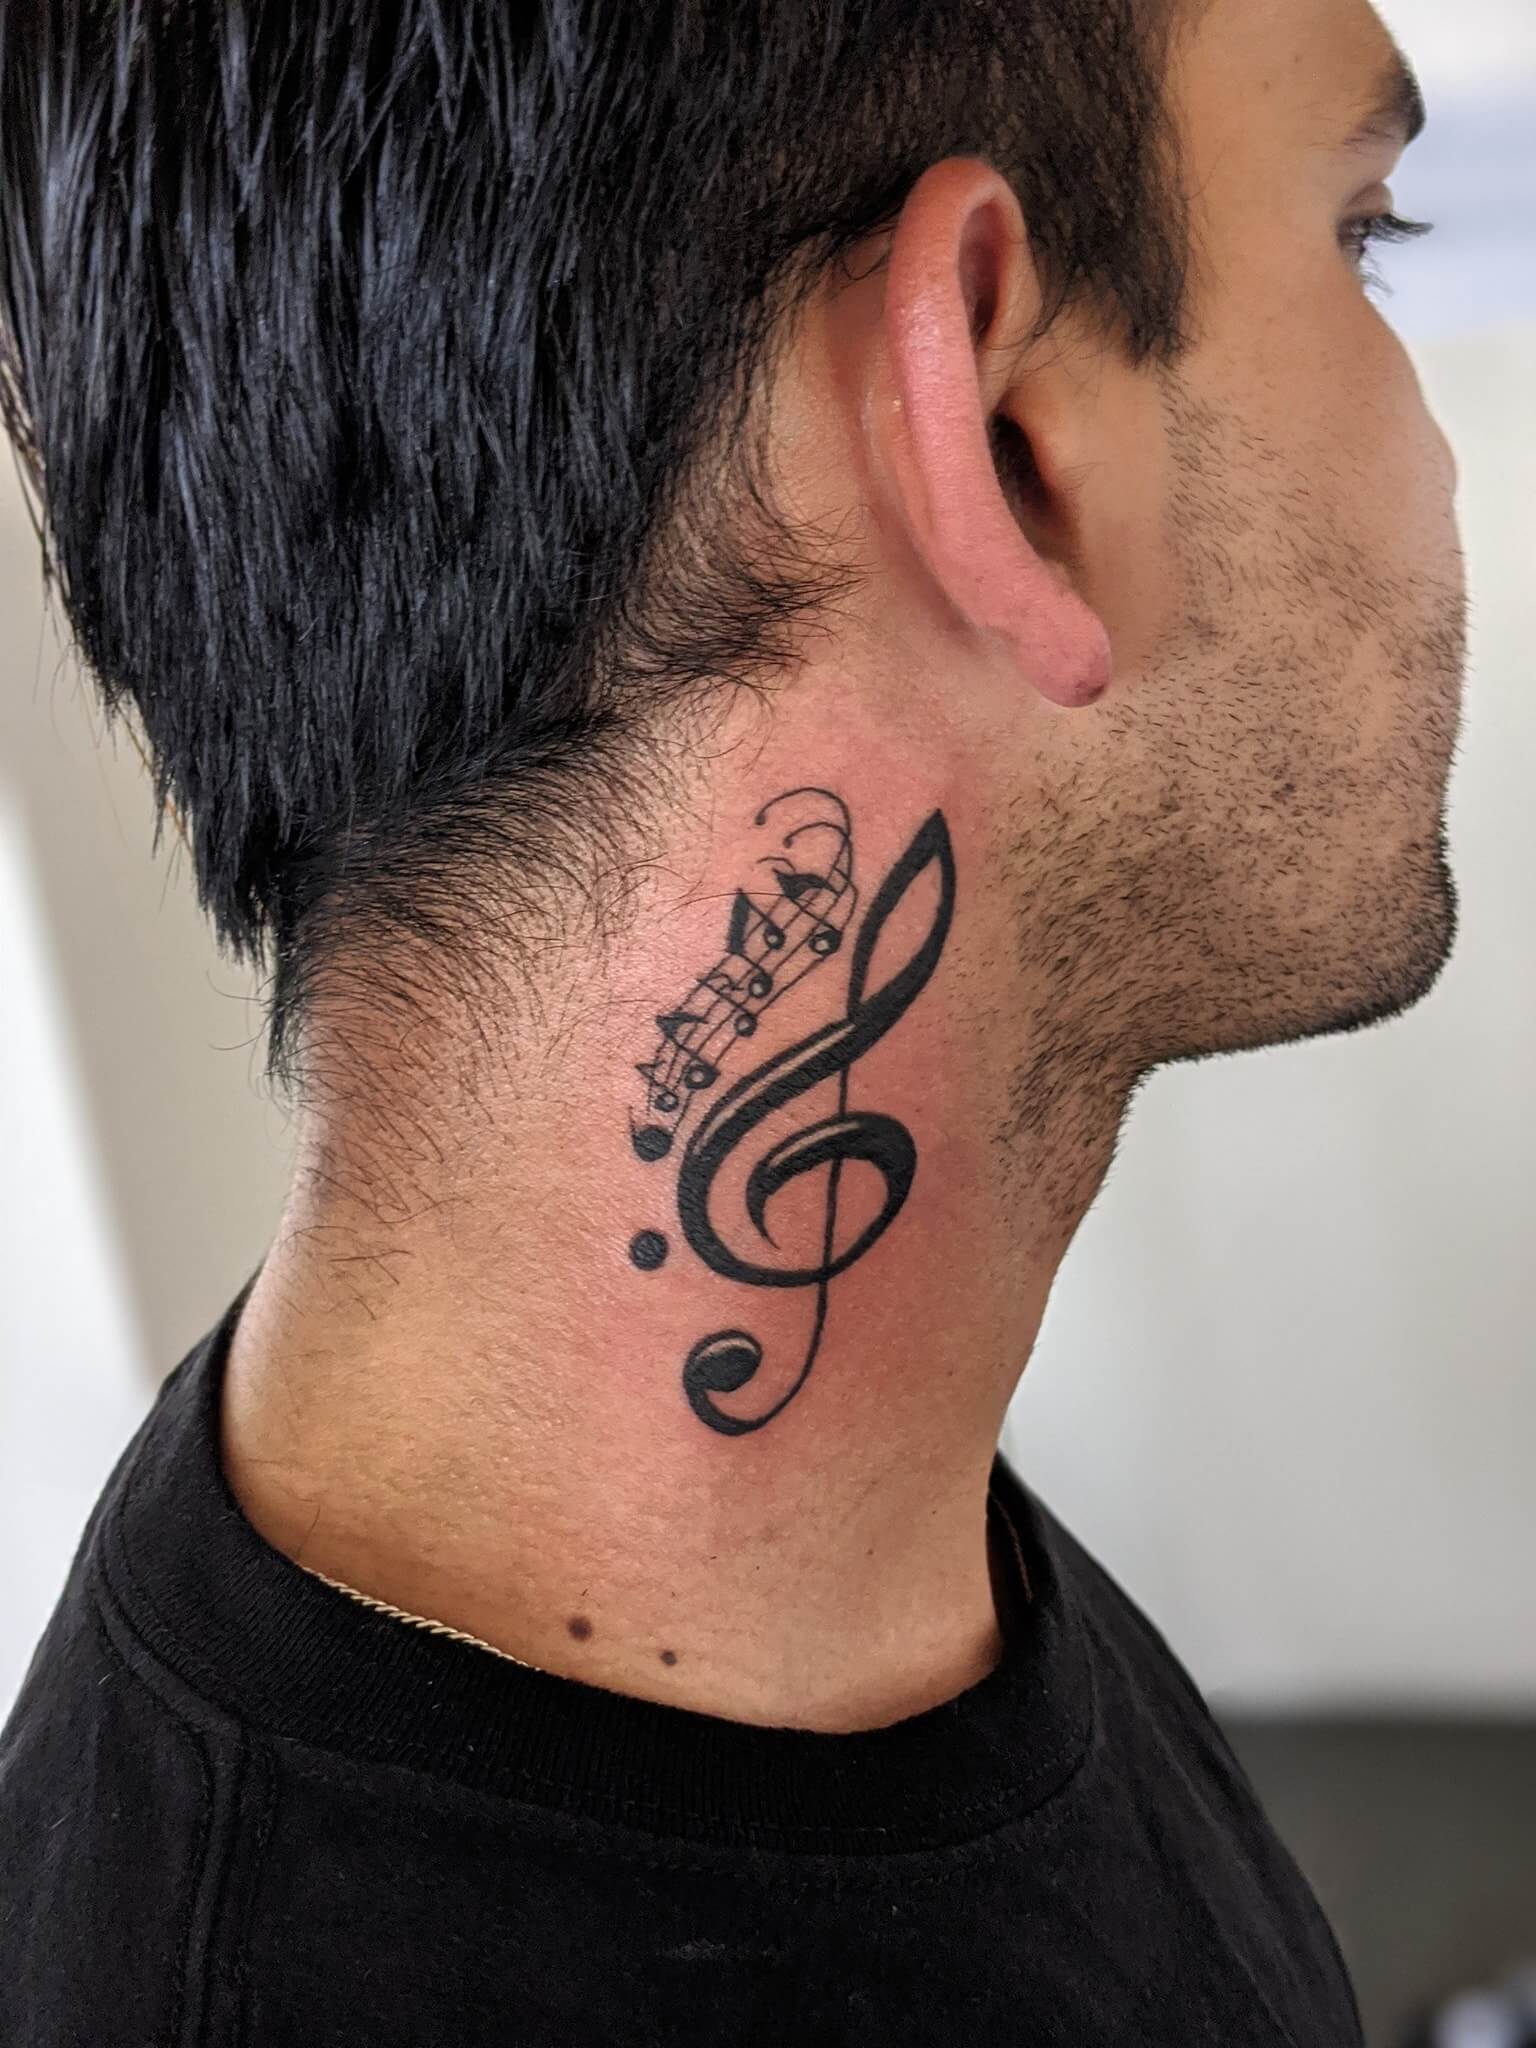 music note tattoo behind ear 29 56 Ideas For Music Note Behind Ear Tattoo and Why They are So Popular?